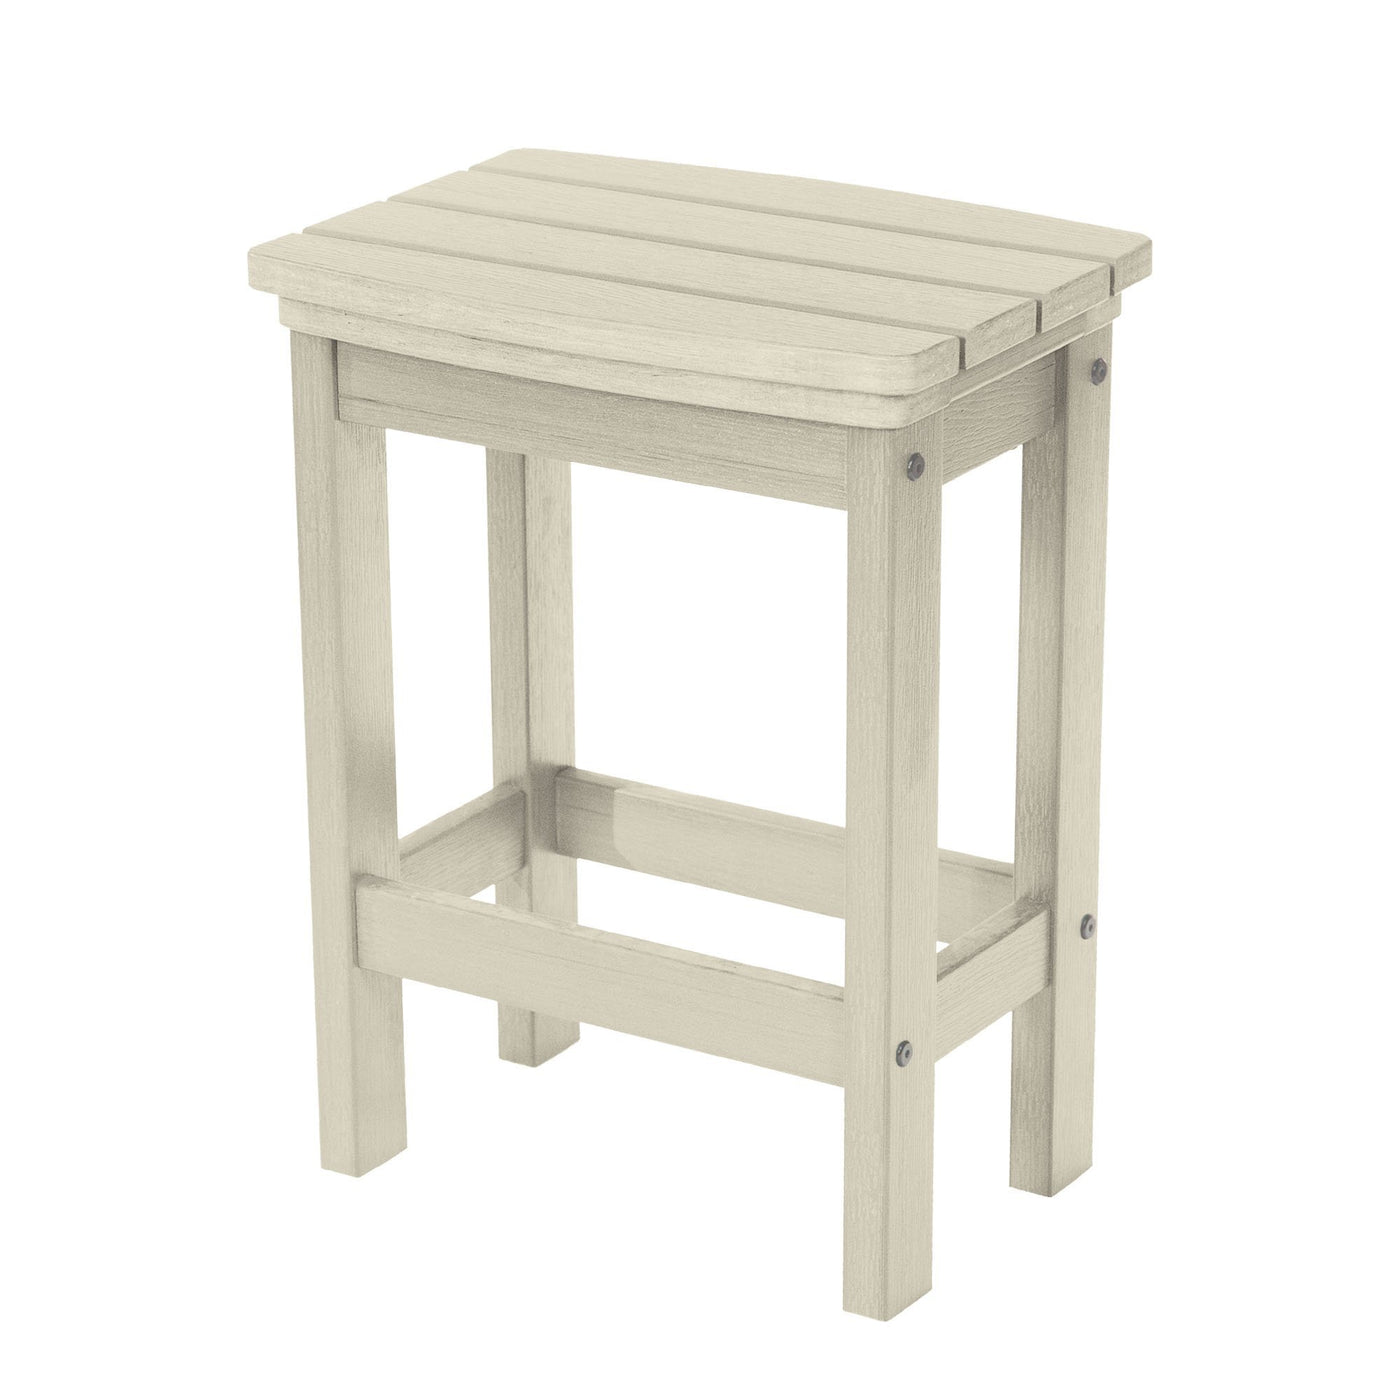 Back view of Lehigh counter height stool in Whitewash